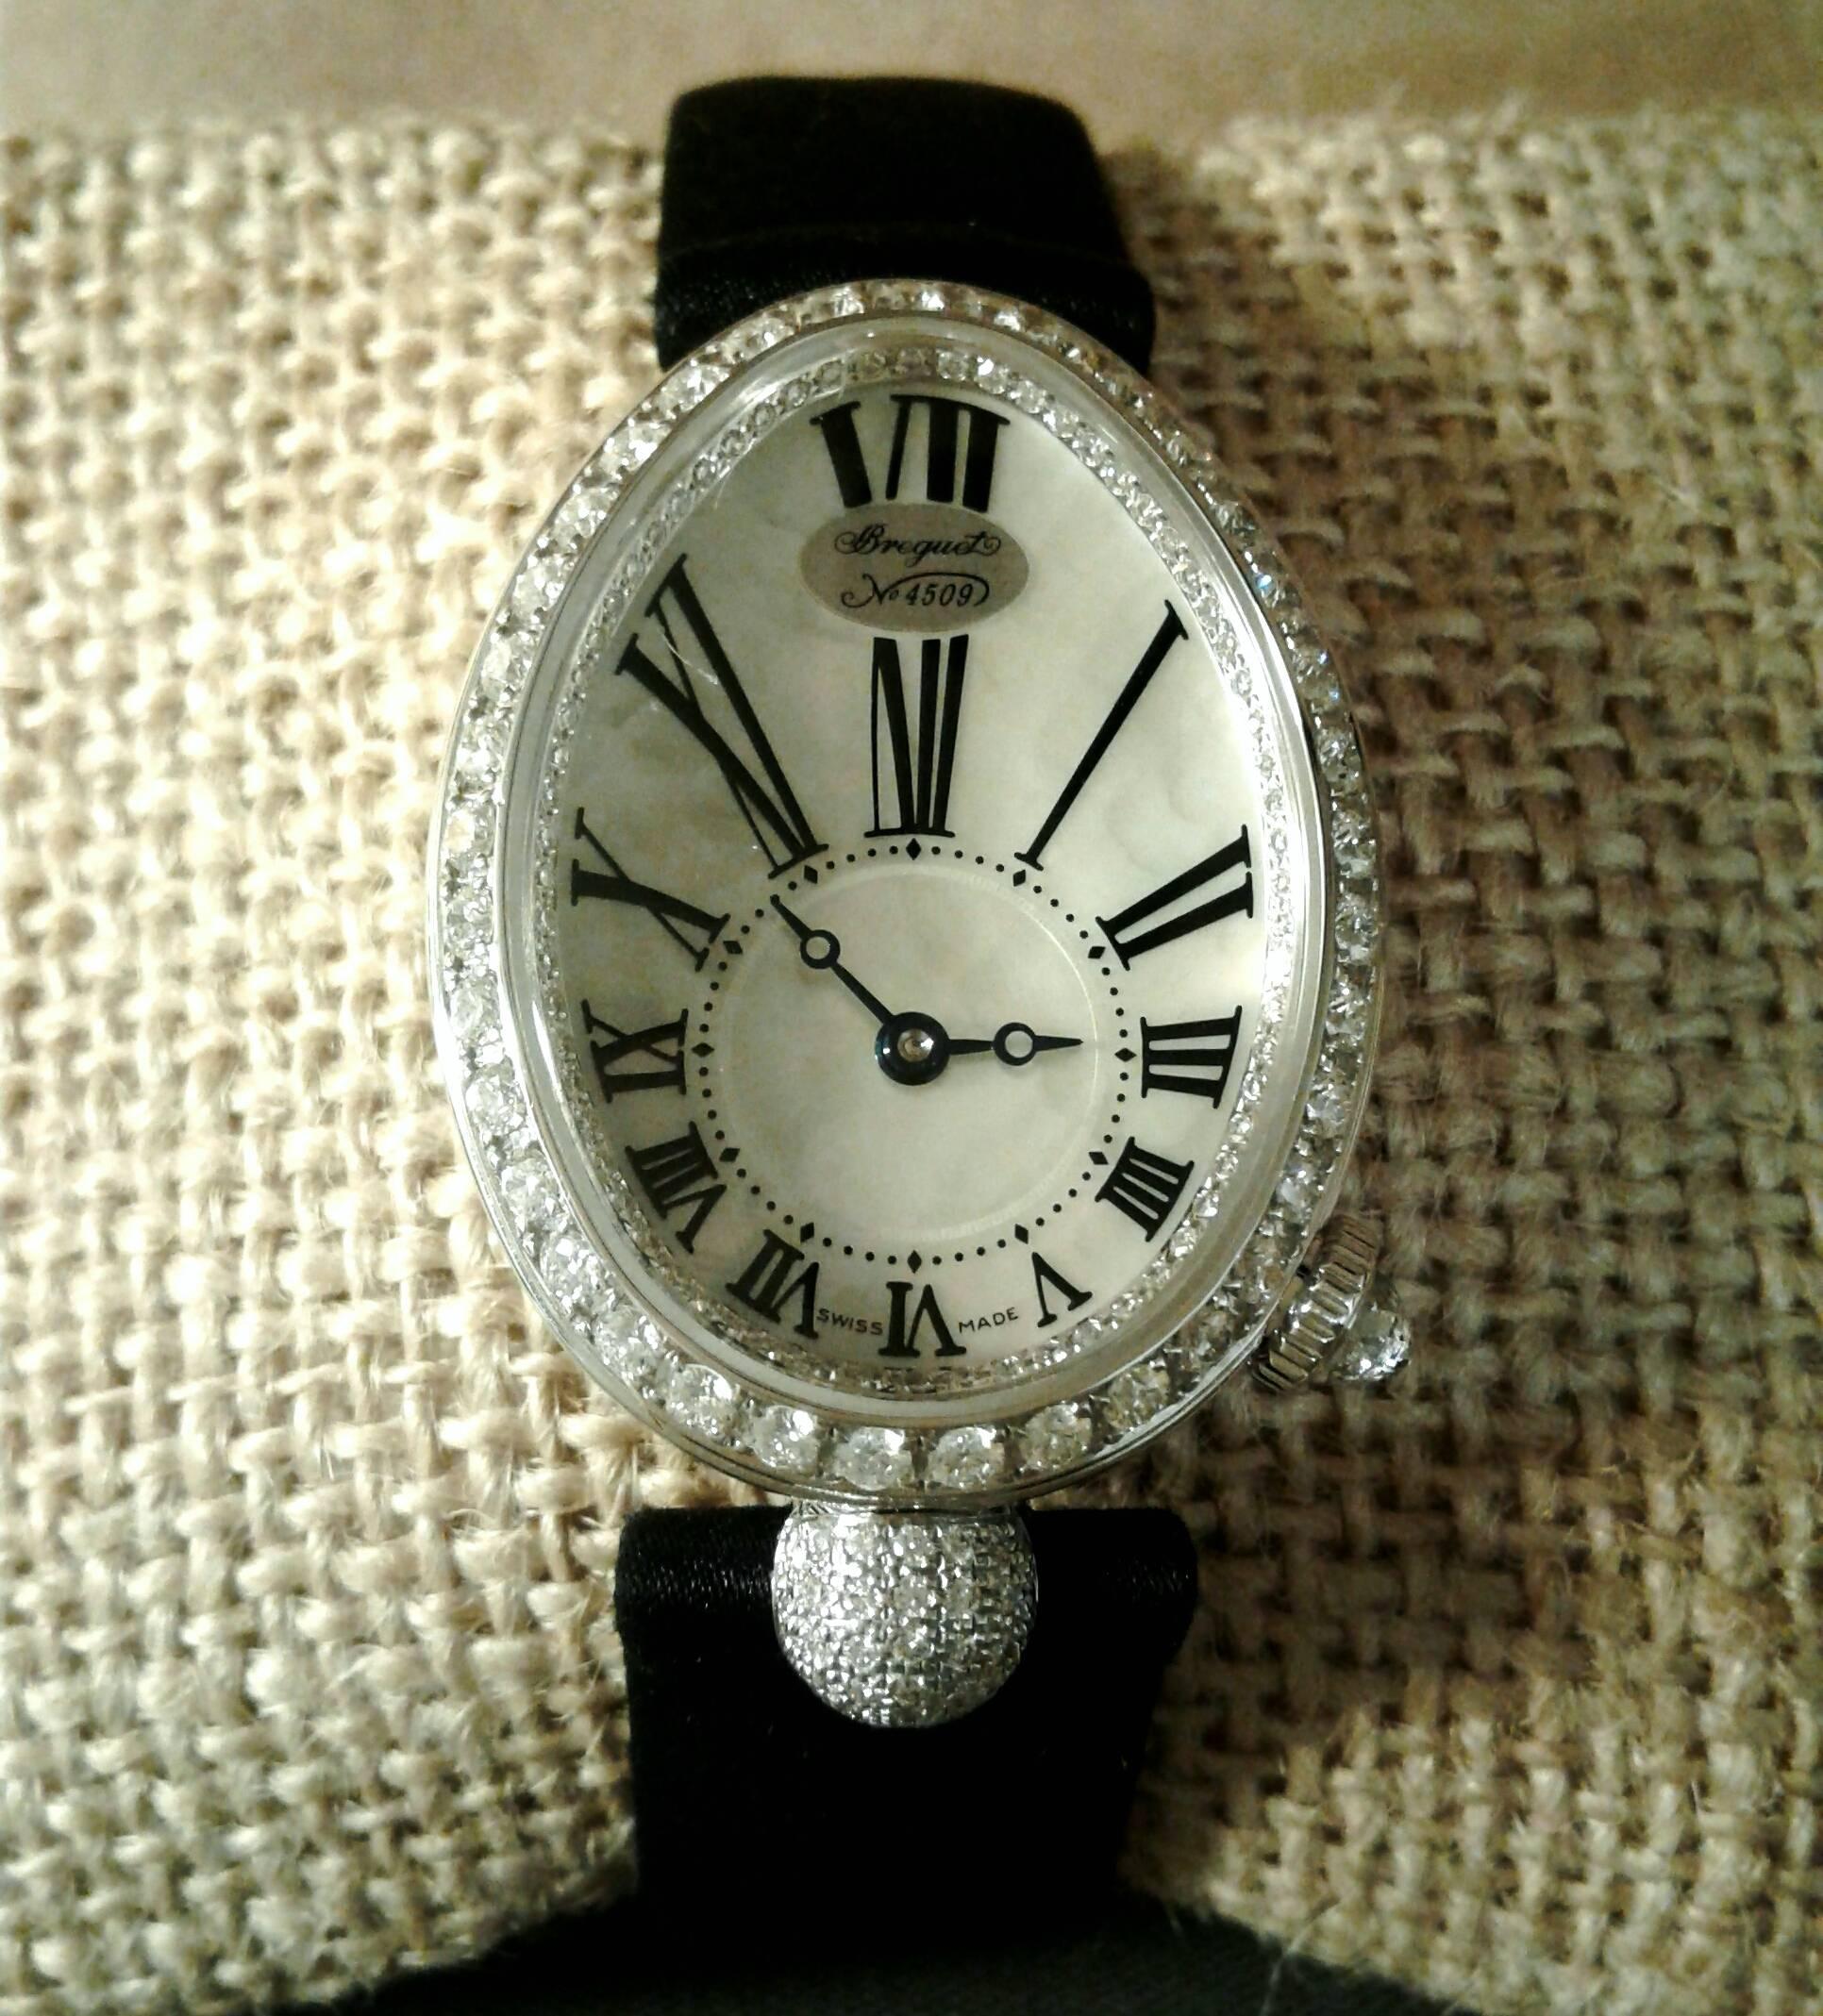 Vintage 18 karat white gold Breguet Queen of Naples Mother of Pearl dial watch with diamond bezel. The timepiece has an automatic movement and features an exhibition case back. The model number is 8928BB51844DD0D.  The serial number is 4509.  No box